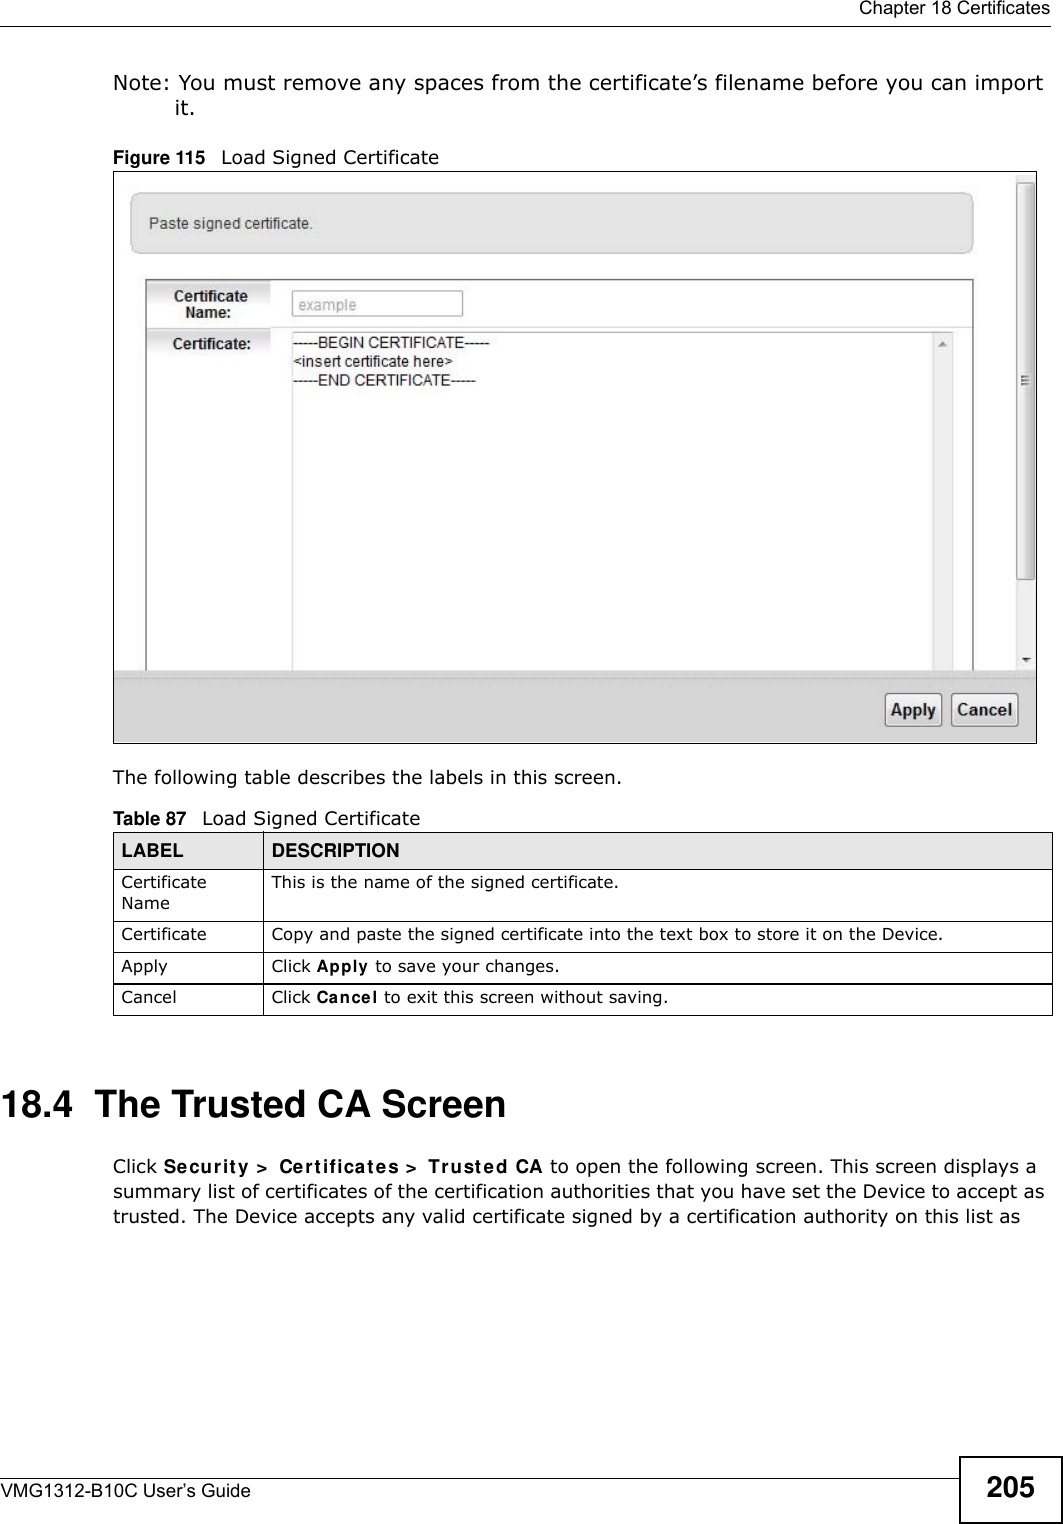  Chapter 18 CertificatesVMG1312-B10C User’s Guide 205Note: You must remove any spaces from the certificate’s filename before you can import it.Figure 115   Load Signed Certificate The following table describes the labels in this screen. 18.4  The Trusted CA ScreenClick Securit y &gt;  Cert ifica t es &gt;  Tr usted CA to open the following screen. This screen displays a summary list of certificates of the certification authorities that you have set the Device to accept as trusted. The Device accepts any valid certificate signed by a certification authority on this list as Table 87   Load Signed CertificateLABEL DESCRIPTIONCertificate NameThis is the name of the signed certificate. Certificate Copy and paste the signed certificate into the text box to store it on the Device.Apply Click Apply to save your changes.Cancel Click Cance l to exit this screen without saving.